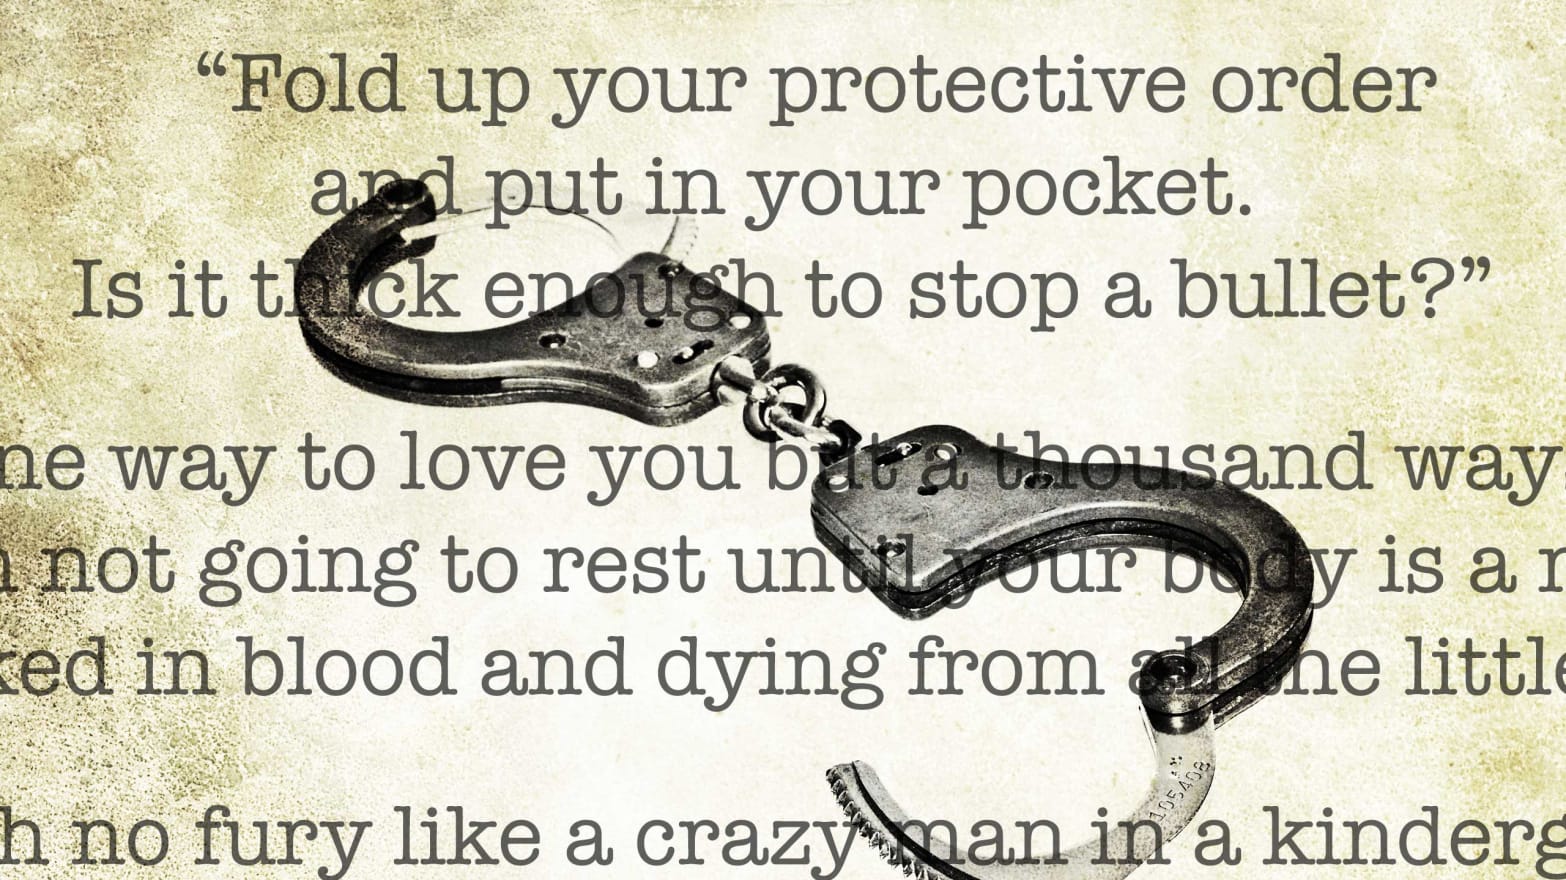 Lyrics to my latest song Prisoner a true love story which is now a dance  tune on www.soundcloud.com/reylopez/prisoner…